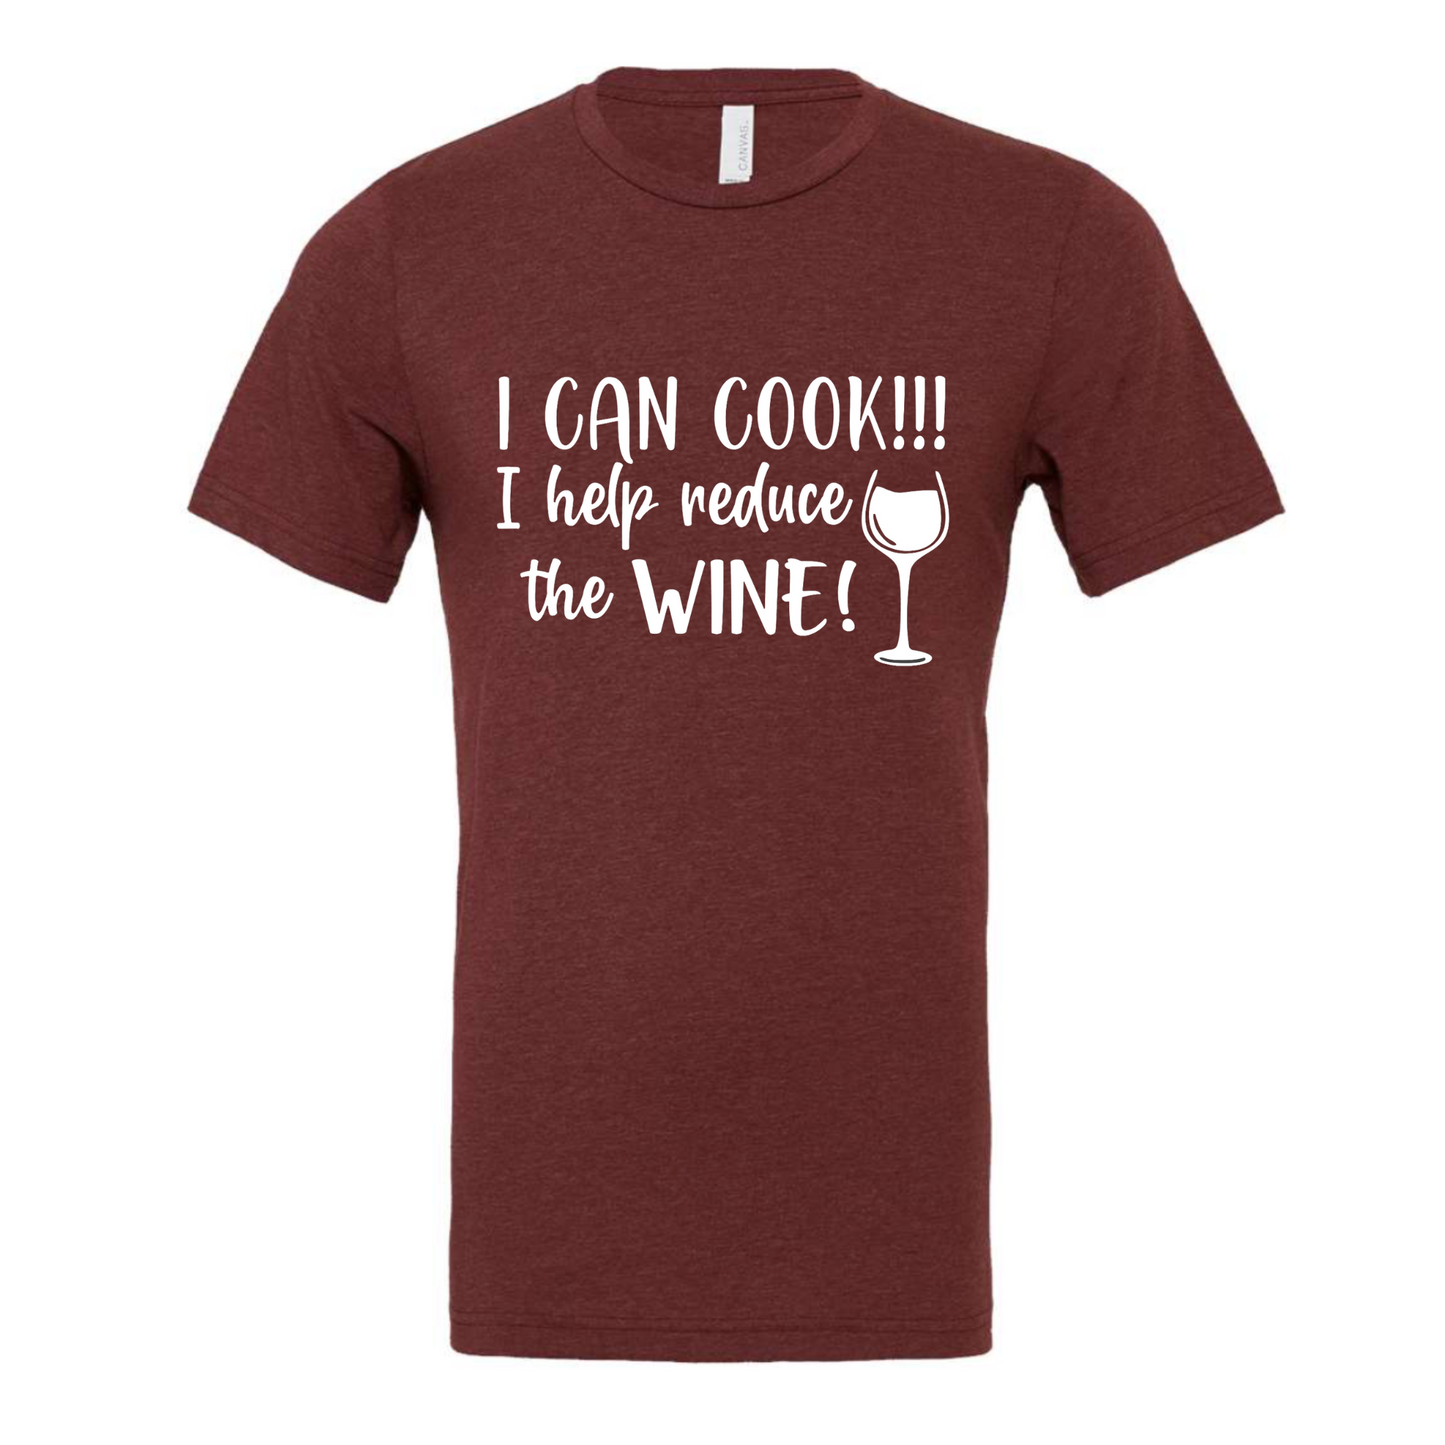 I Can Cook. I help reduce wine! - T-Shirt - maroon with white writing, front view.